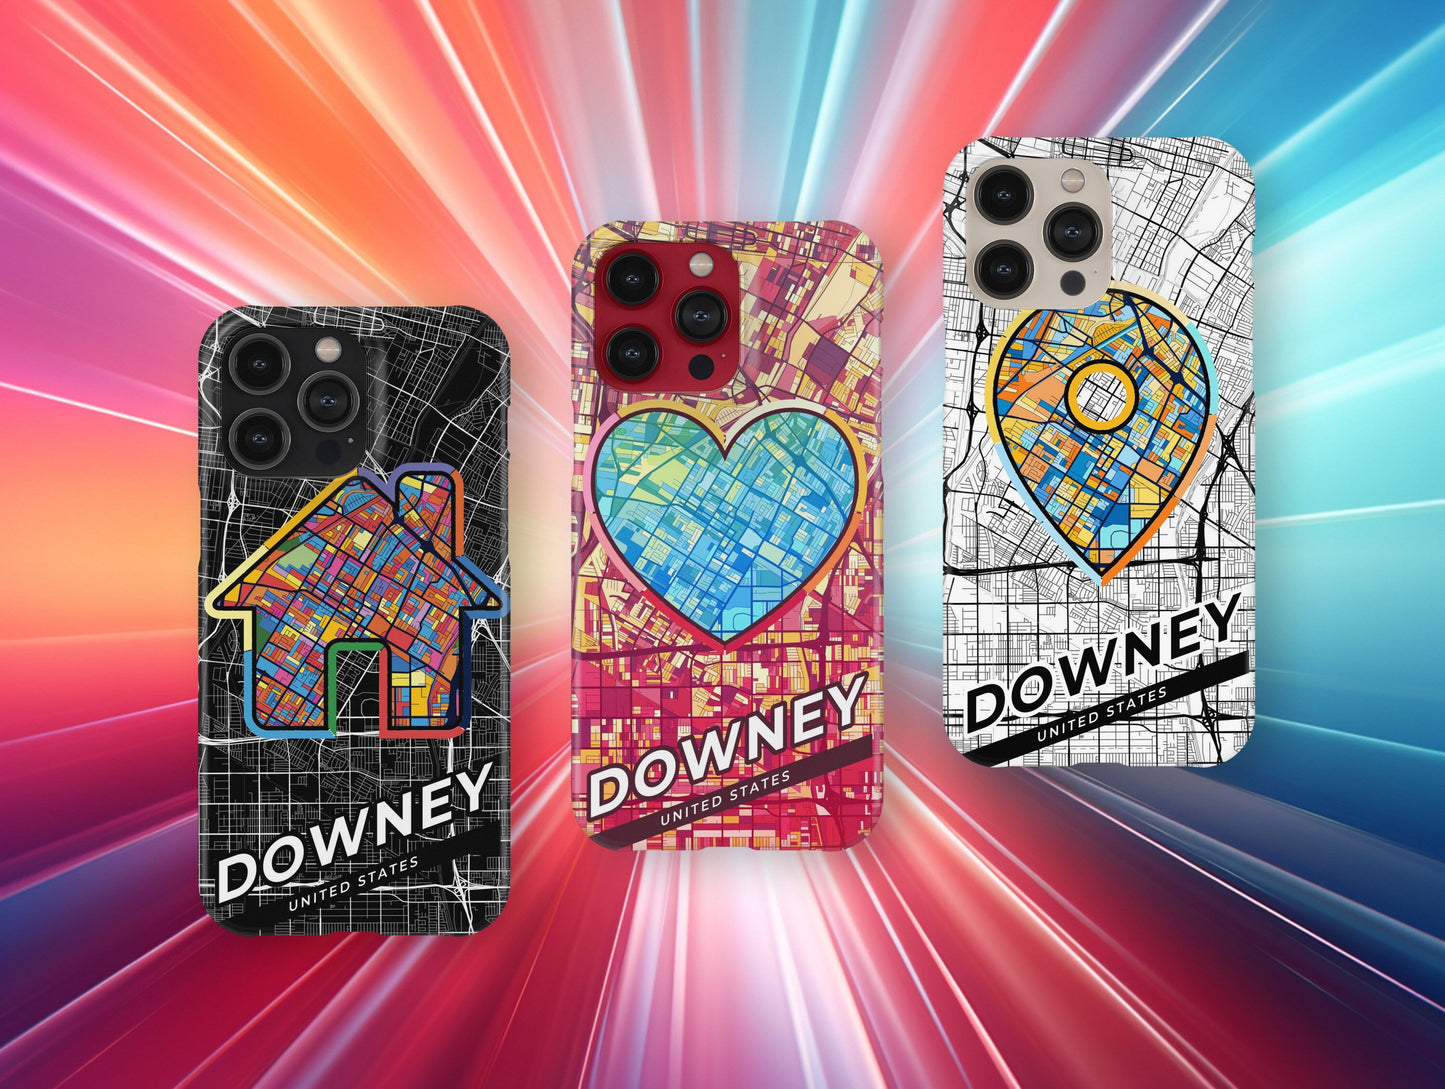 Downey California slim phone case with colorful icon. Birthday, wedding or housewarming gift. Couple match cases.